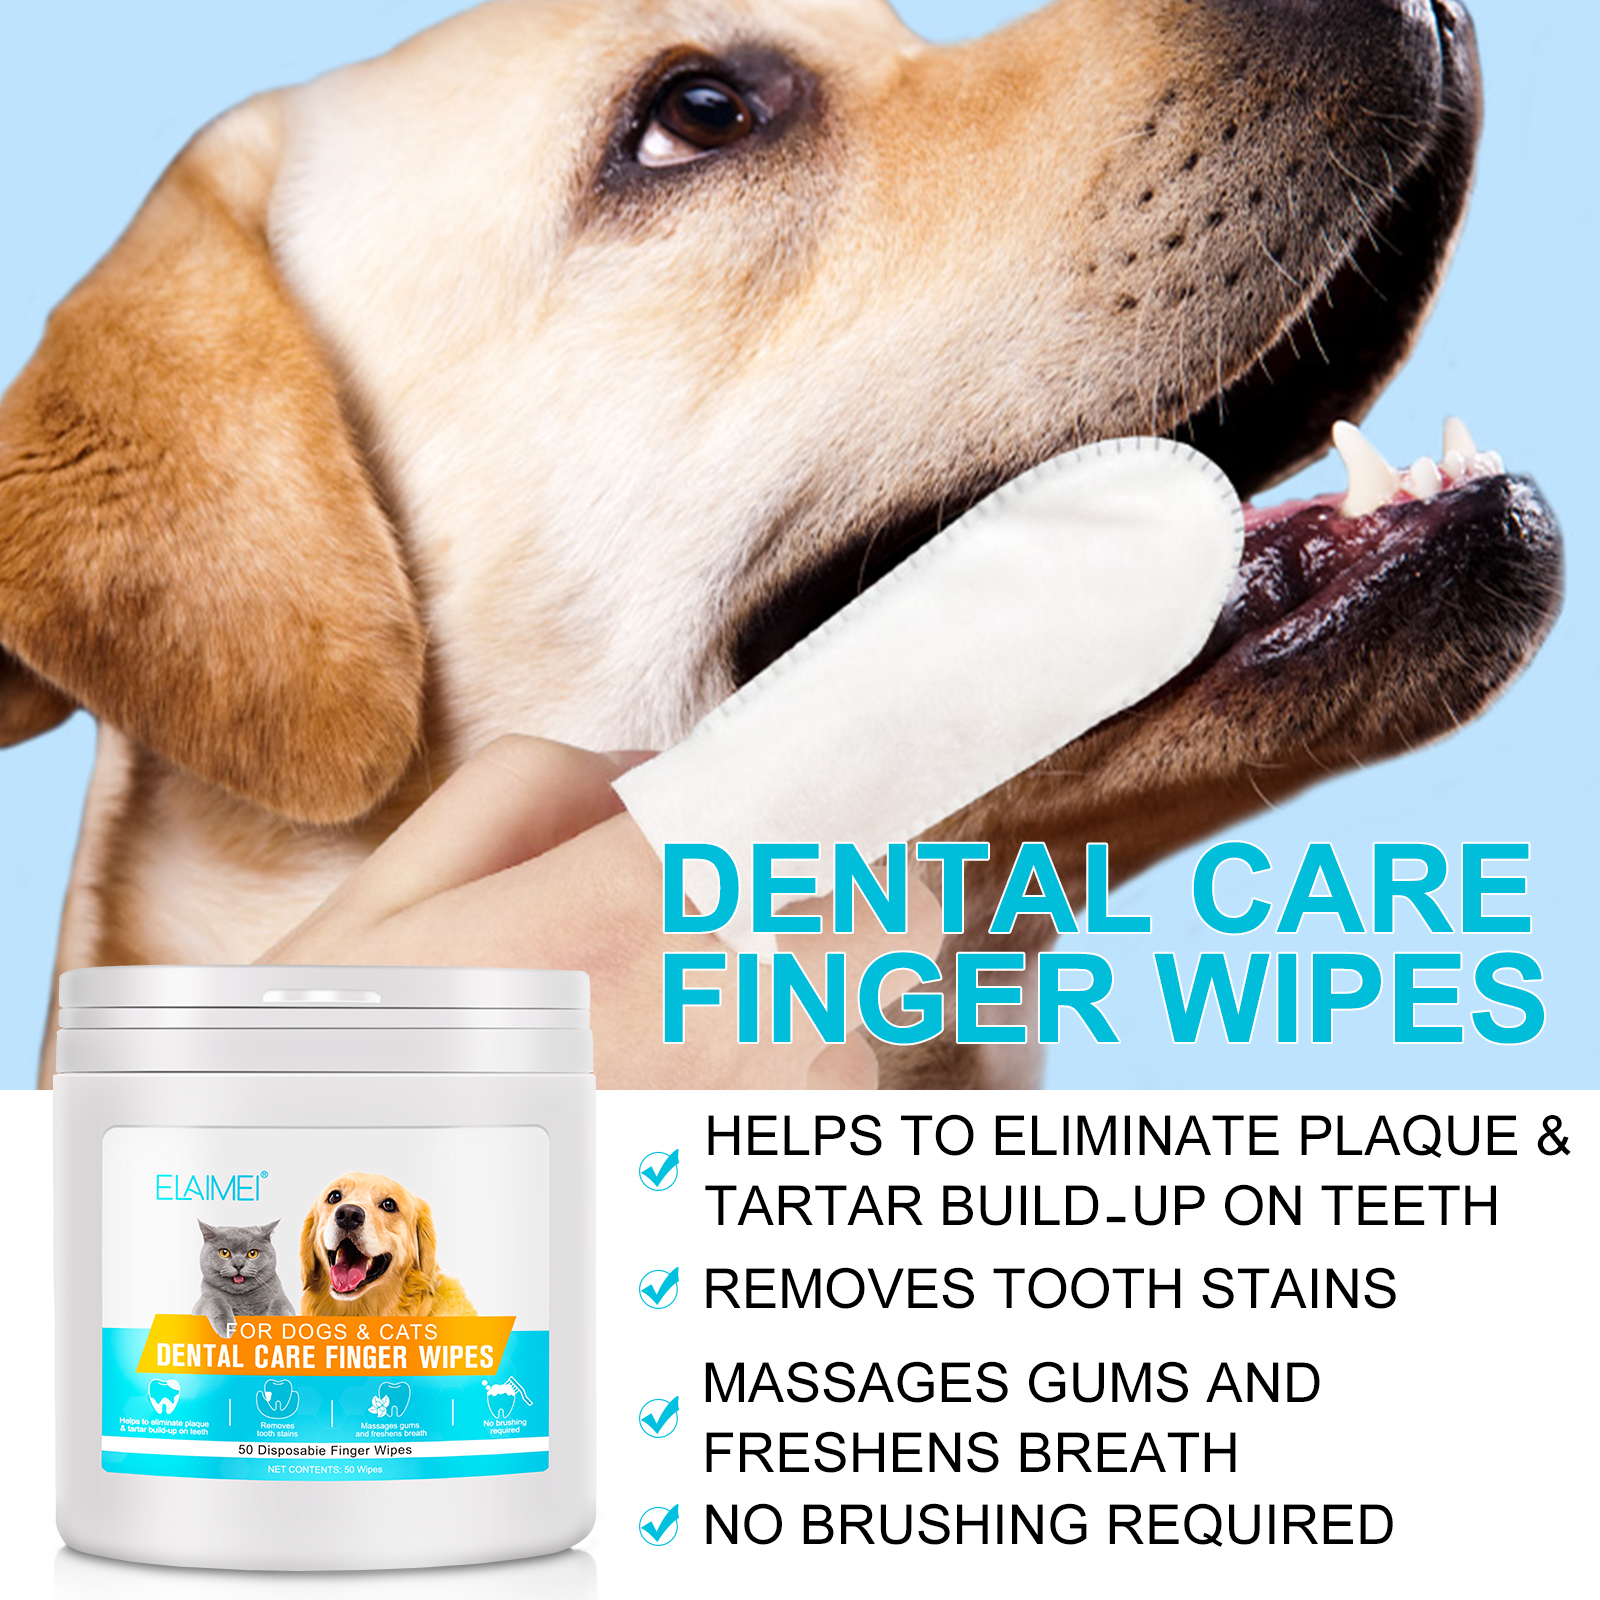 Elaimei Pet Dental Care Tooth Finger Wipes Dog Cat Oral Cleaning Fresh Breath Bad Smell Remover Hygiene and Health (Pack of 50pcs)